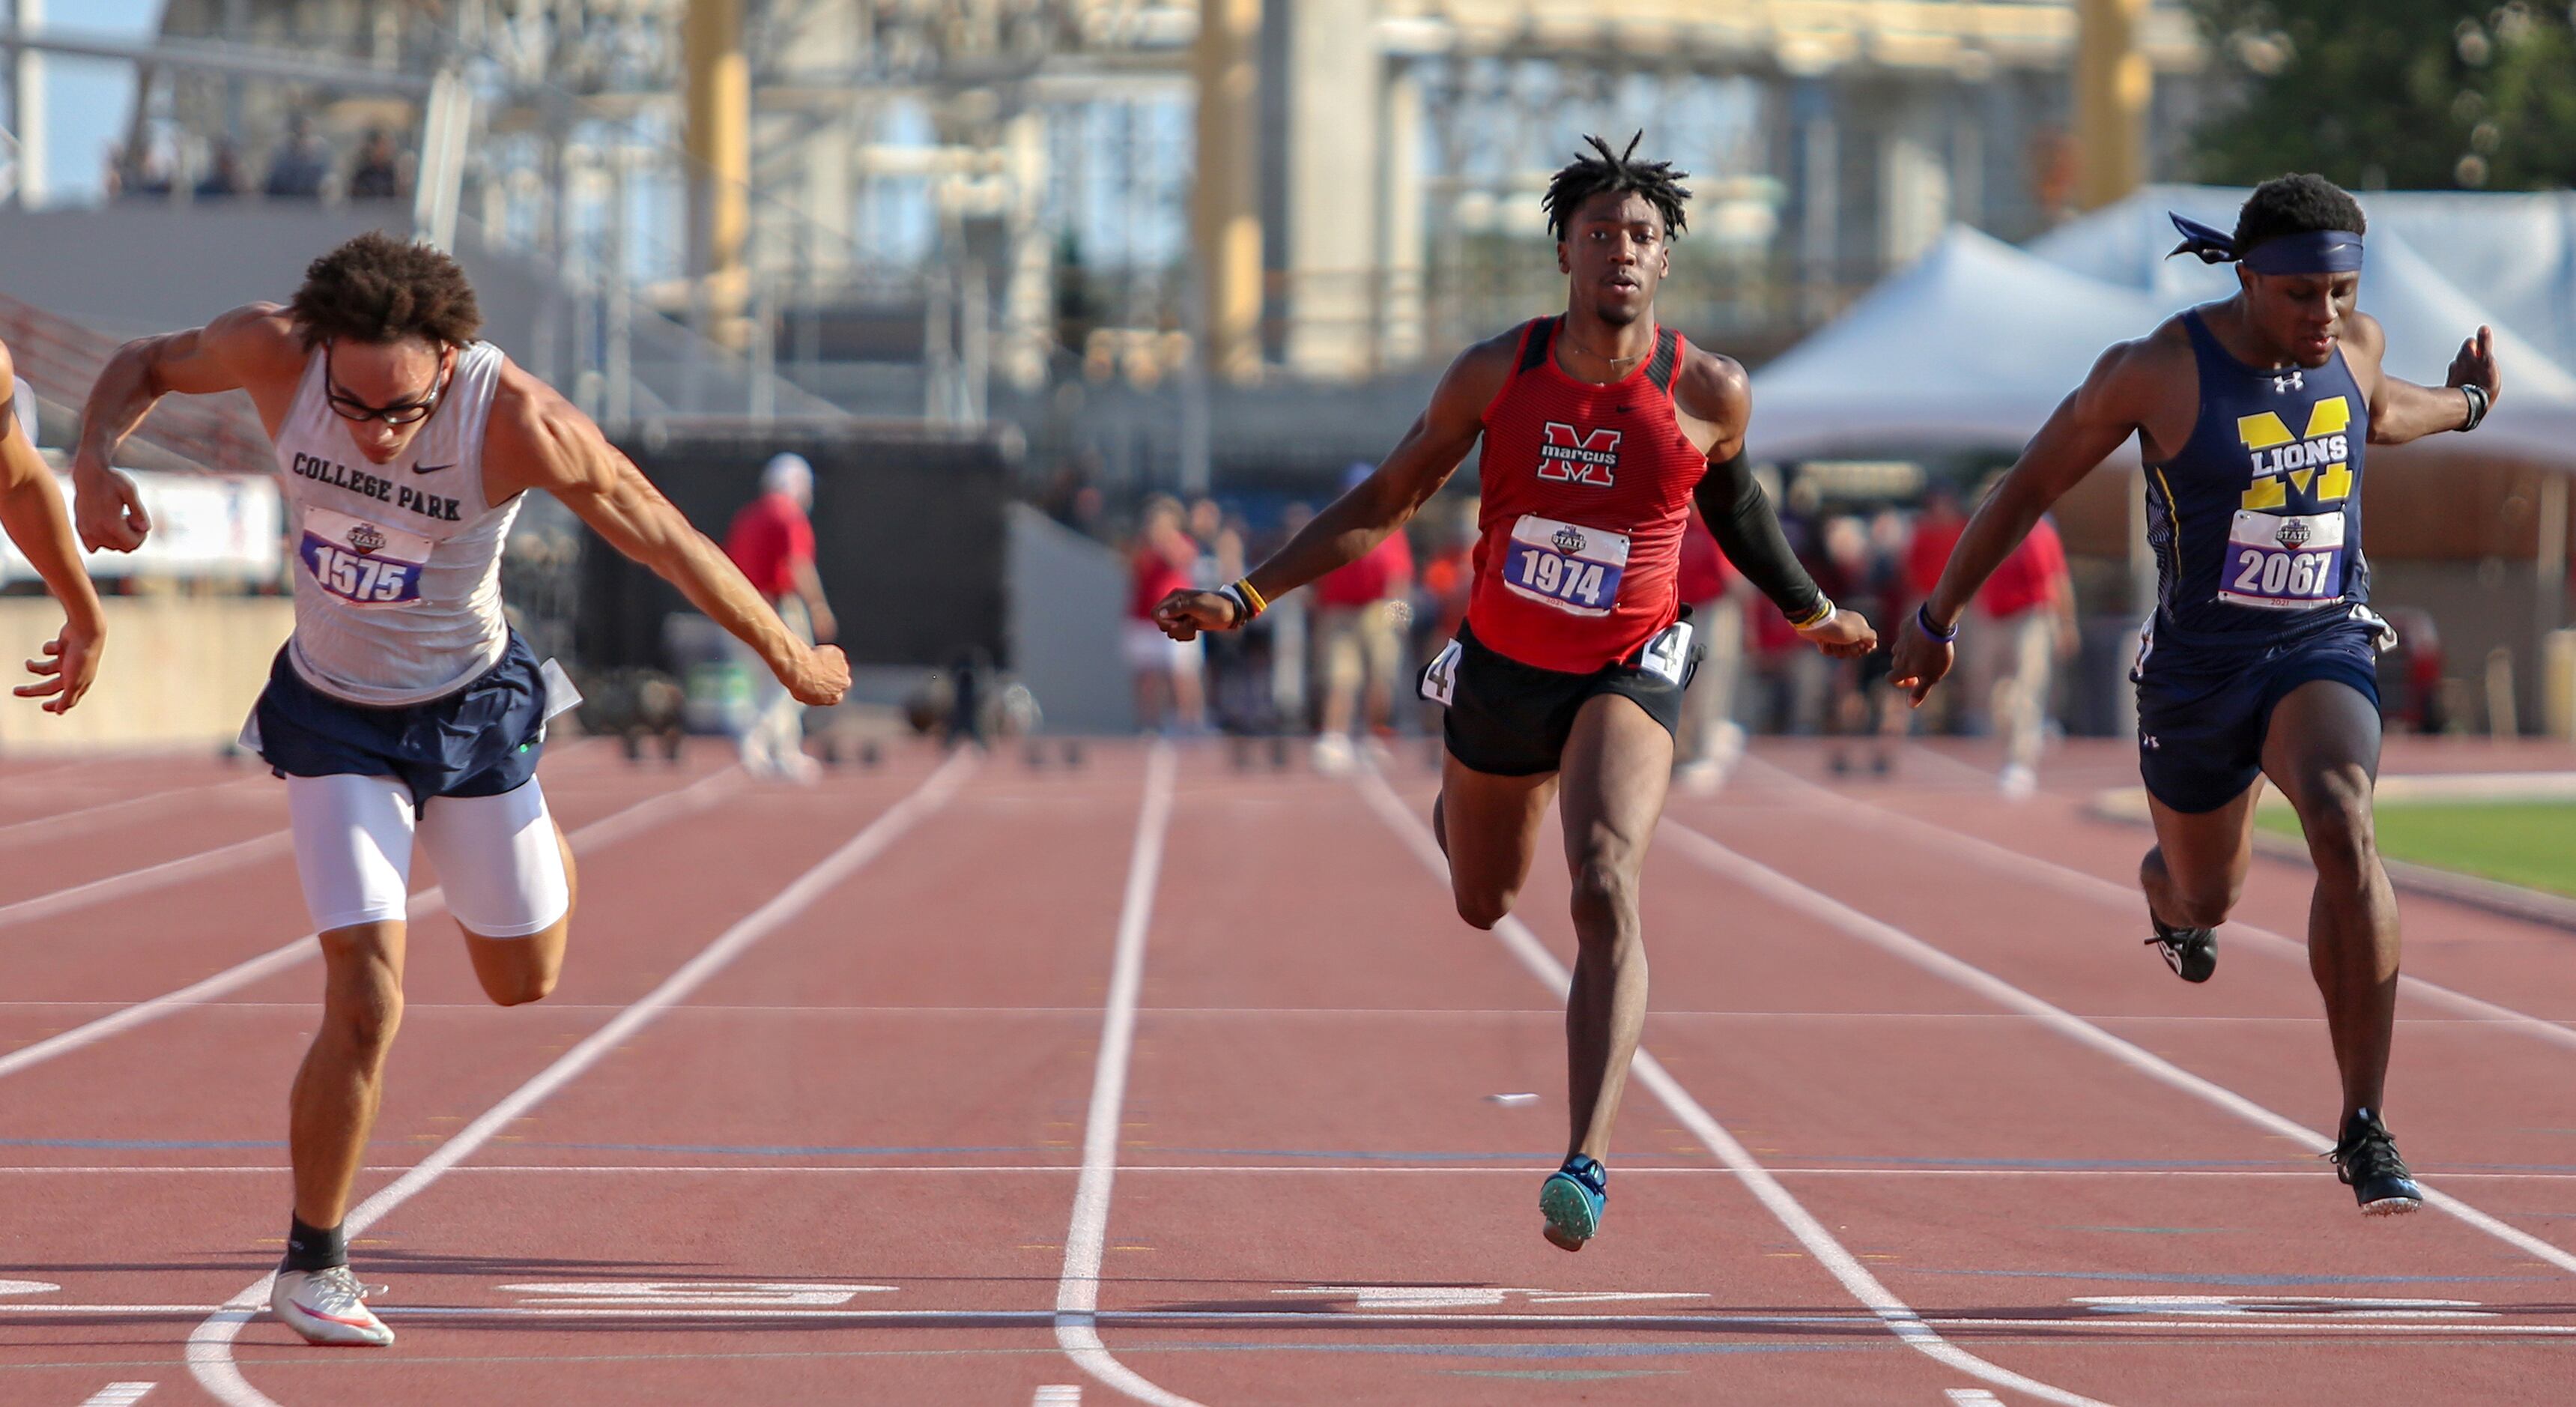 Flower Mound Marcus' J. Michael Sturdivant competes in the 6A Boys 100 meter run during the...